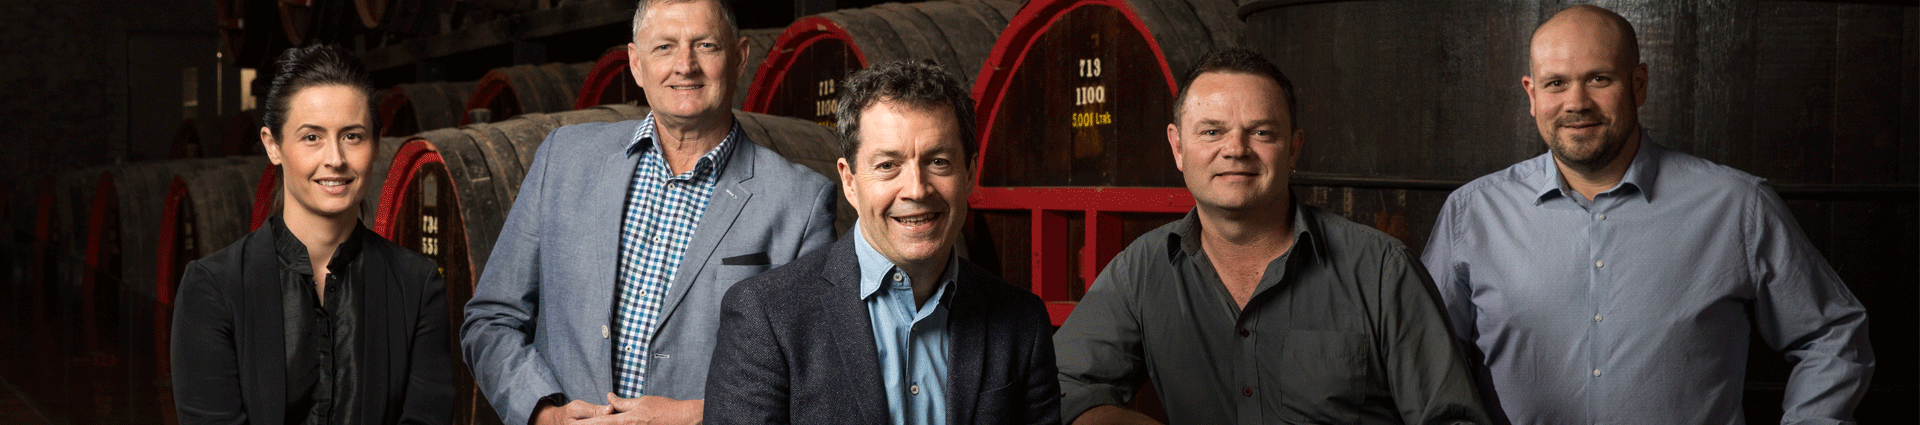 Penfolds winemaking team with barrels behind